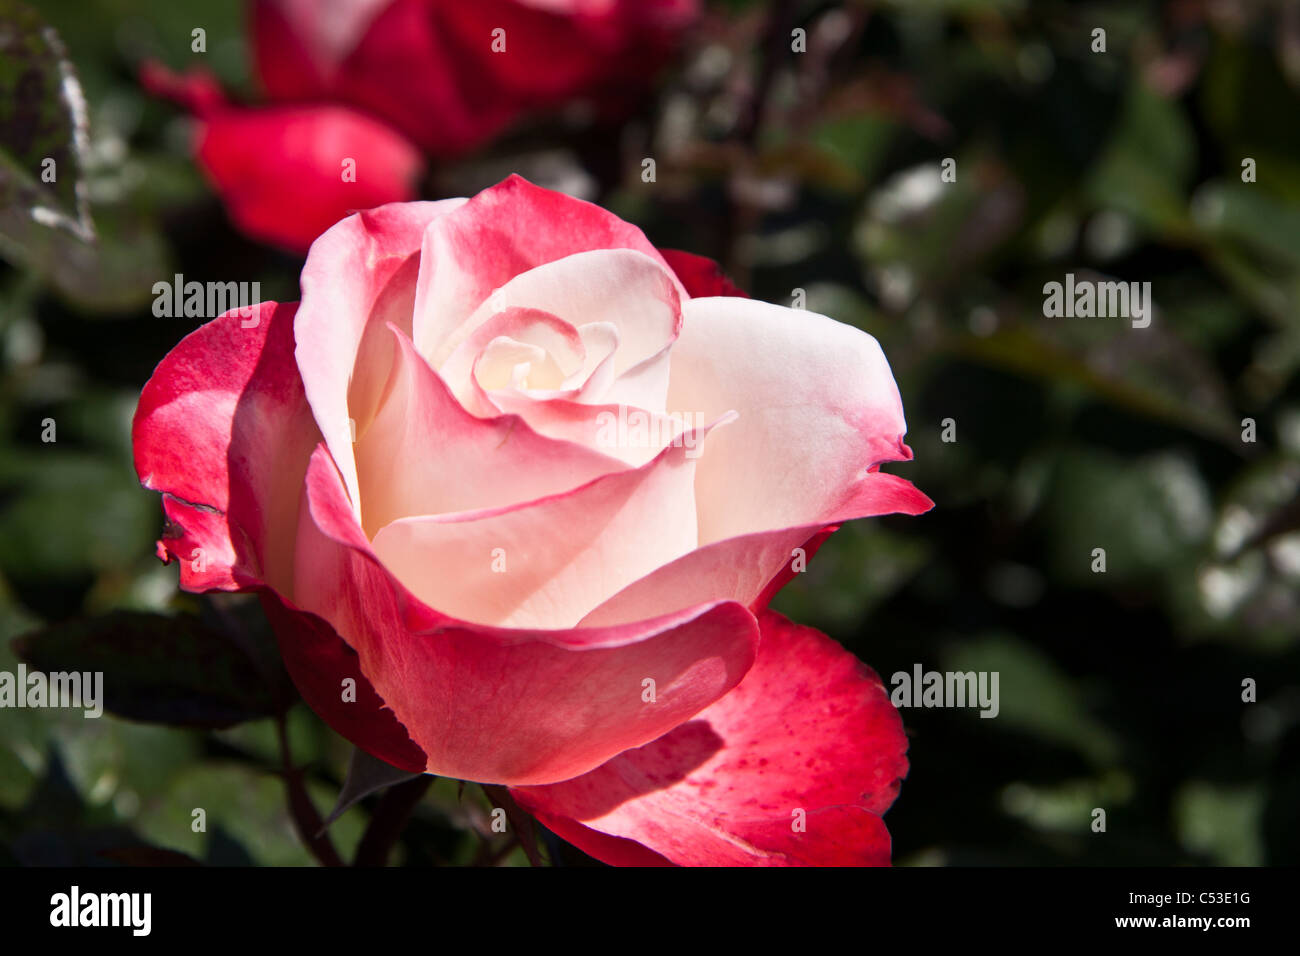 Pink and white rose surrounded by green leaves Stock Photo